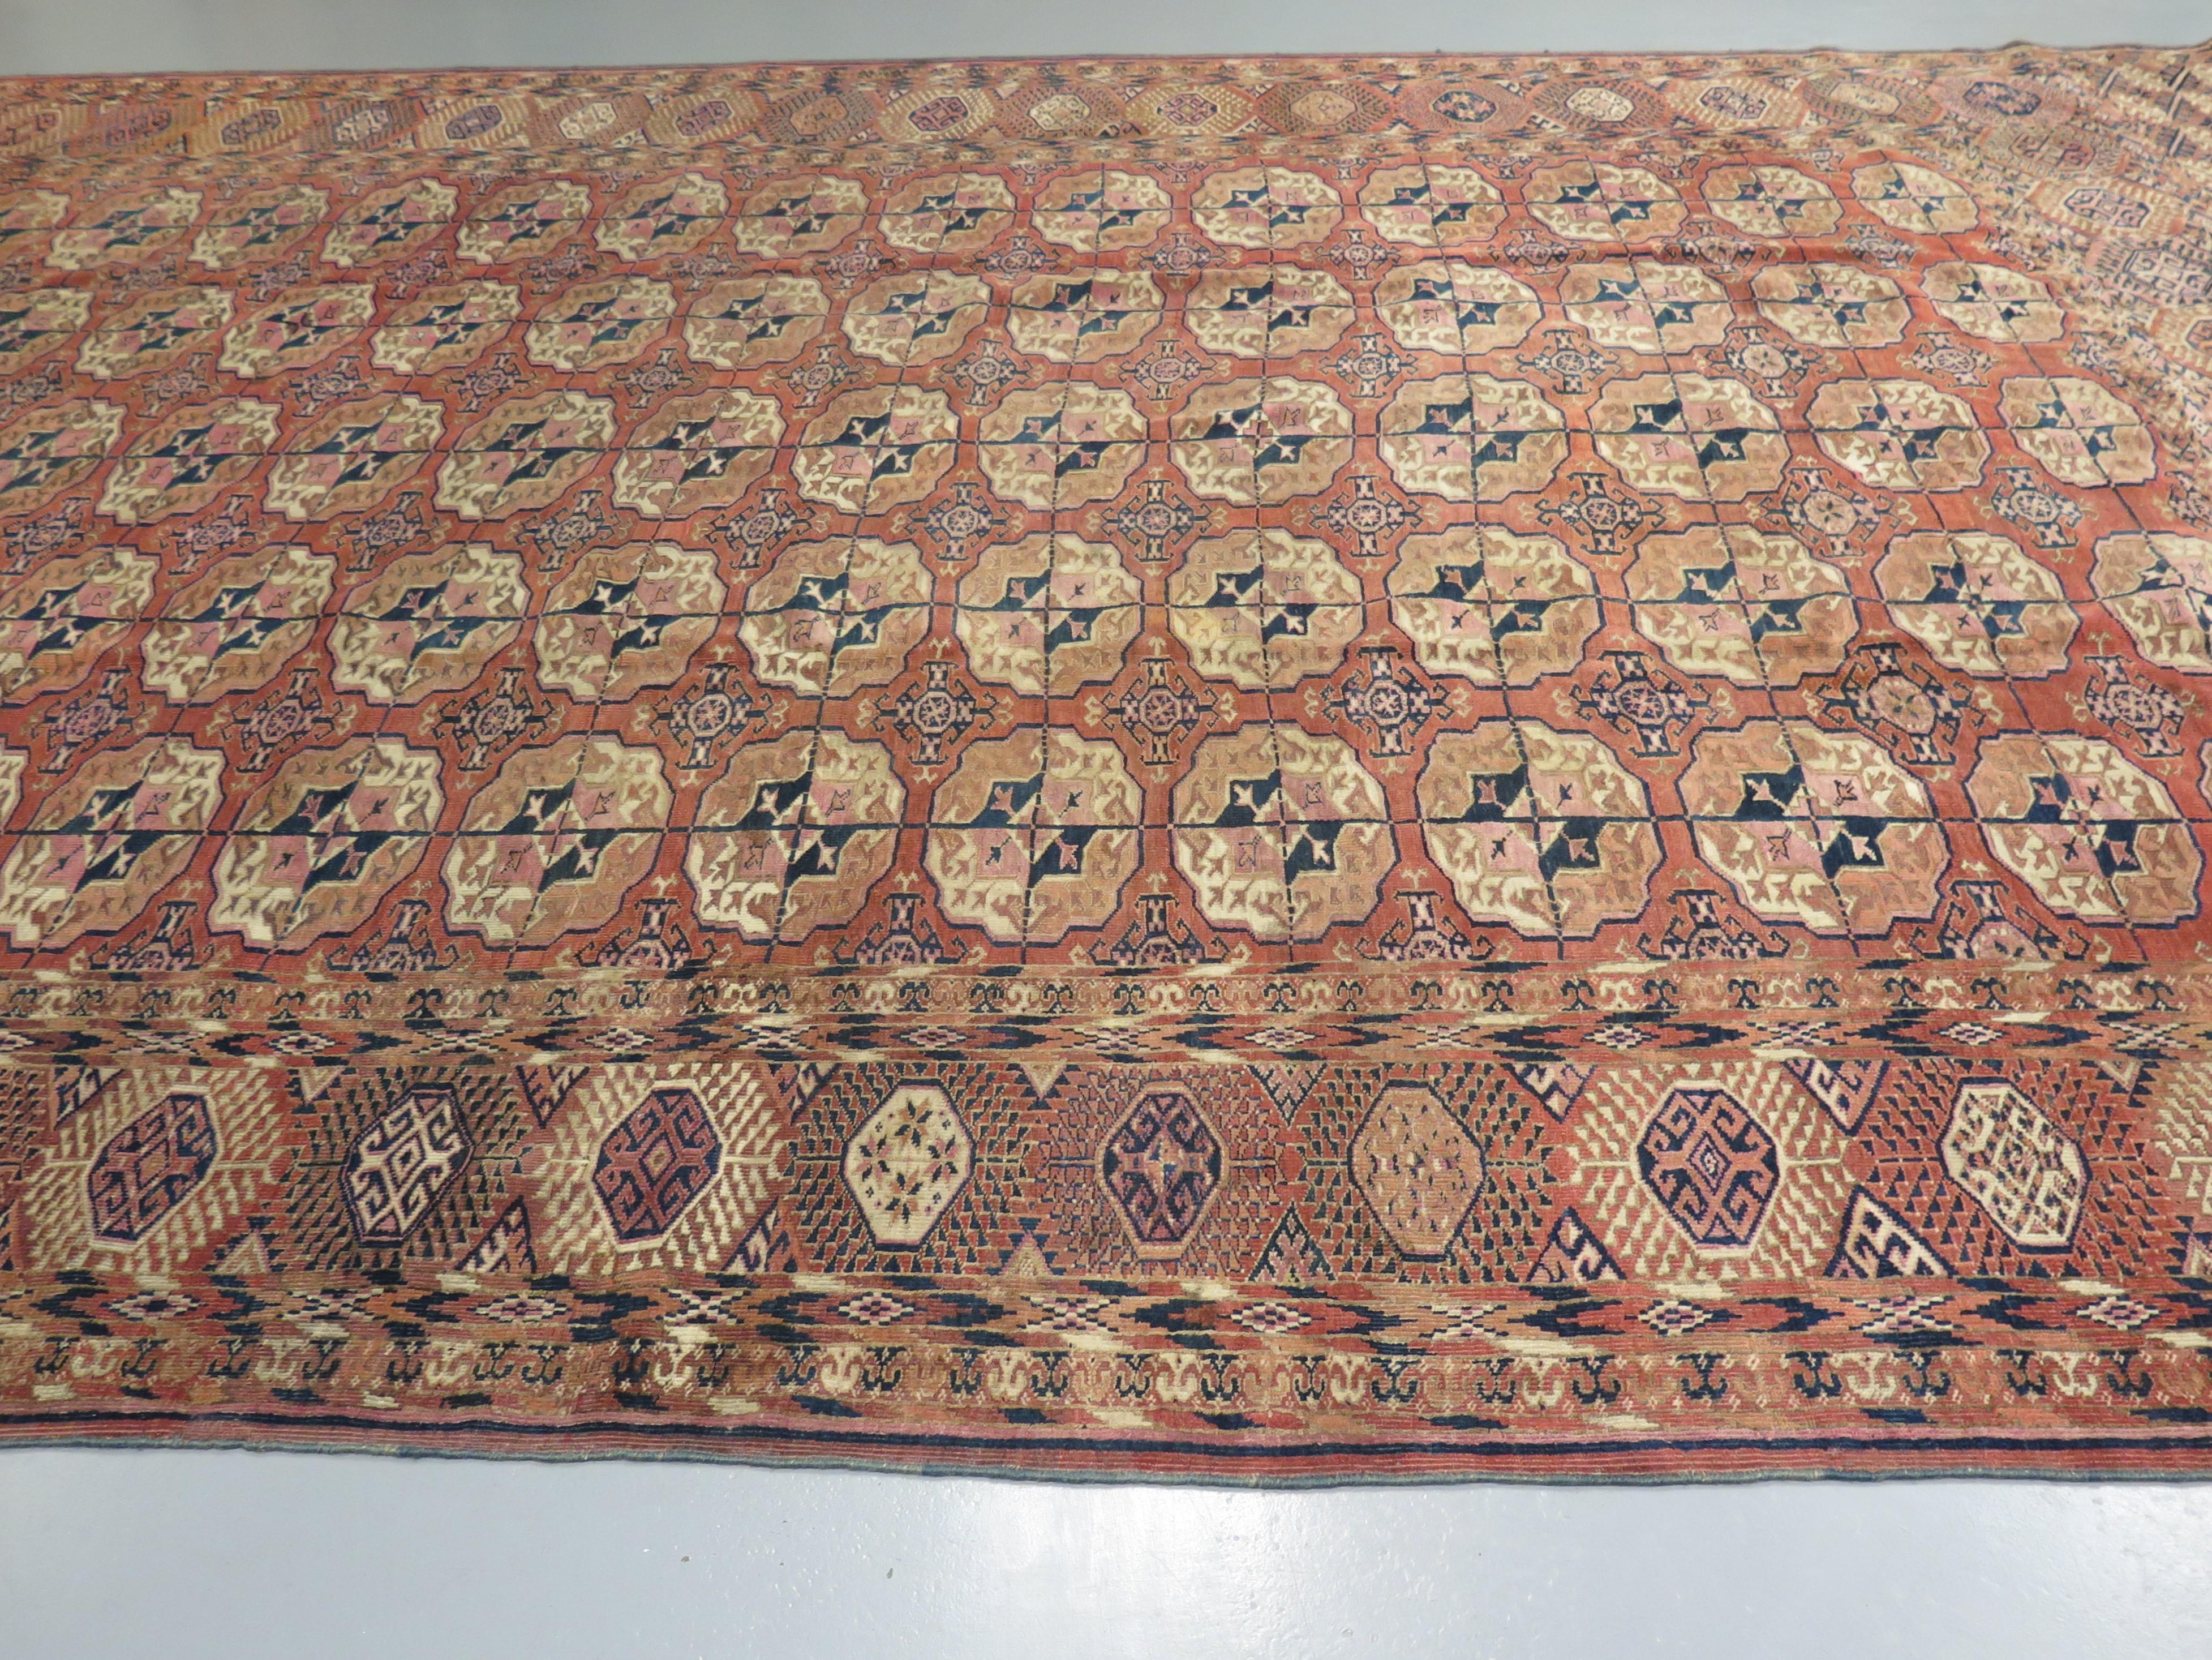 Tekke carpets are instantly recognizable for their distinctive stamped elephant foot patterns, even more so the early pieces, well known for their bold, visually arresting drawings. Produced by the weavers of the Tekke tribes of Central Asia, Tekke